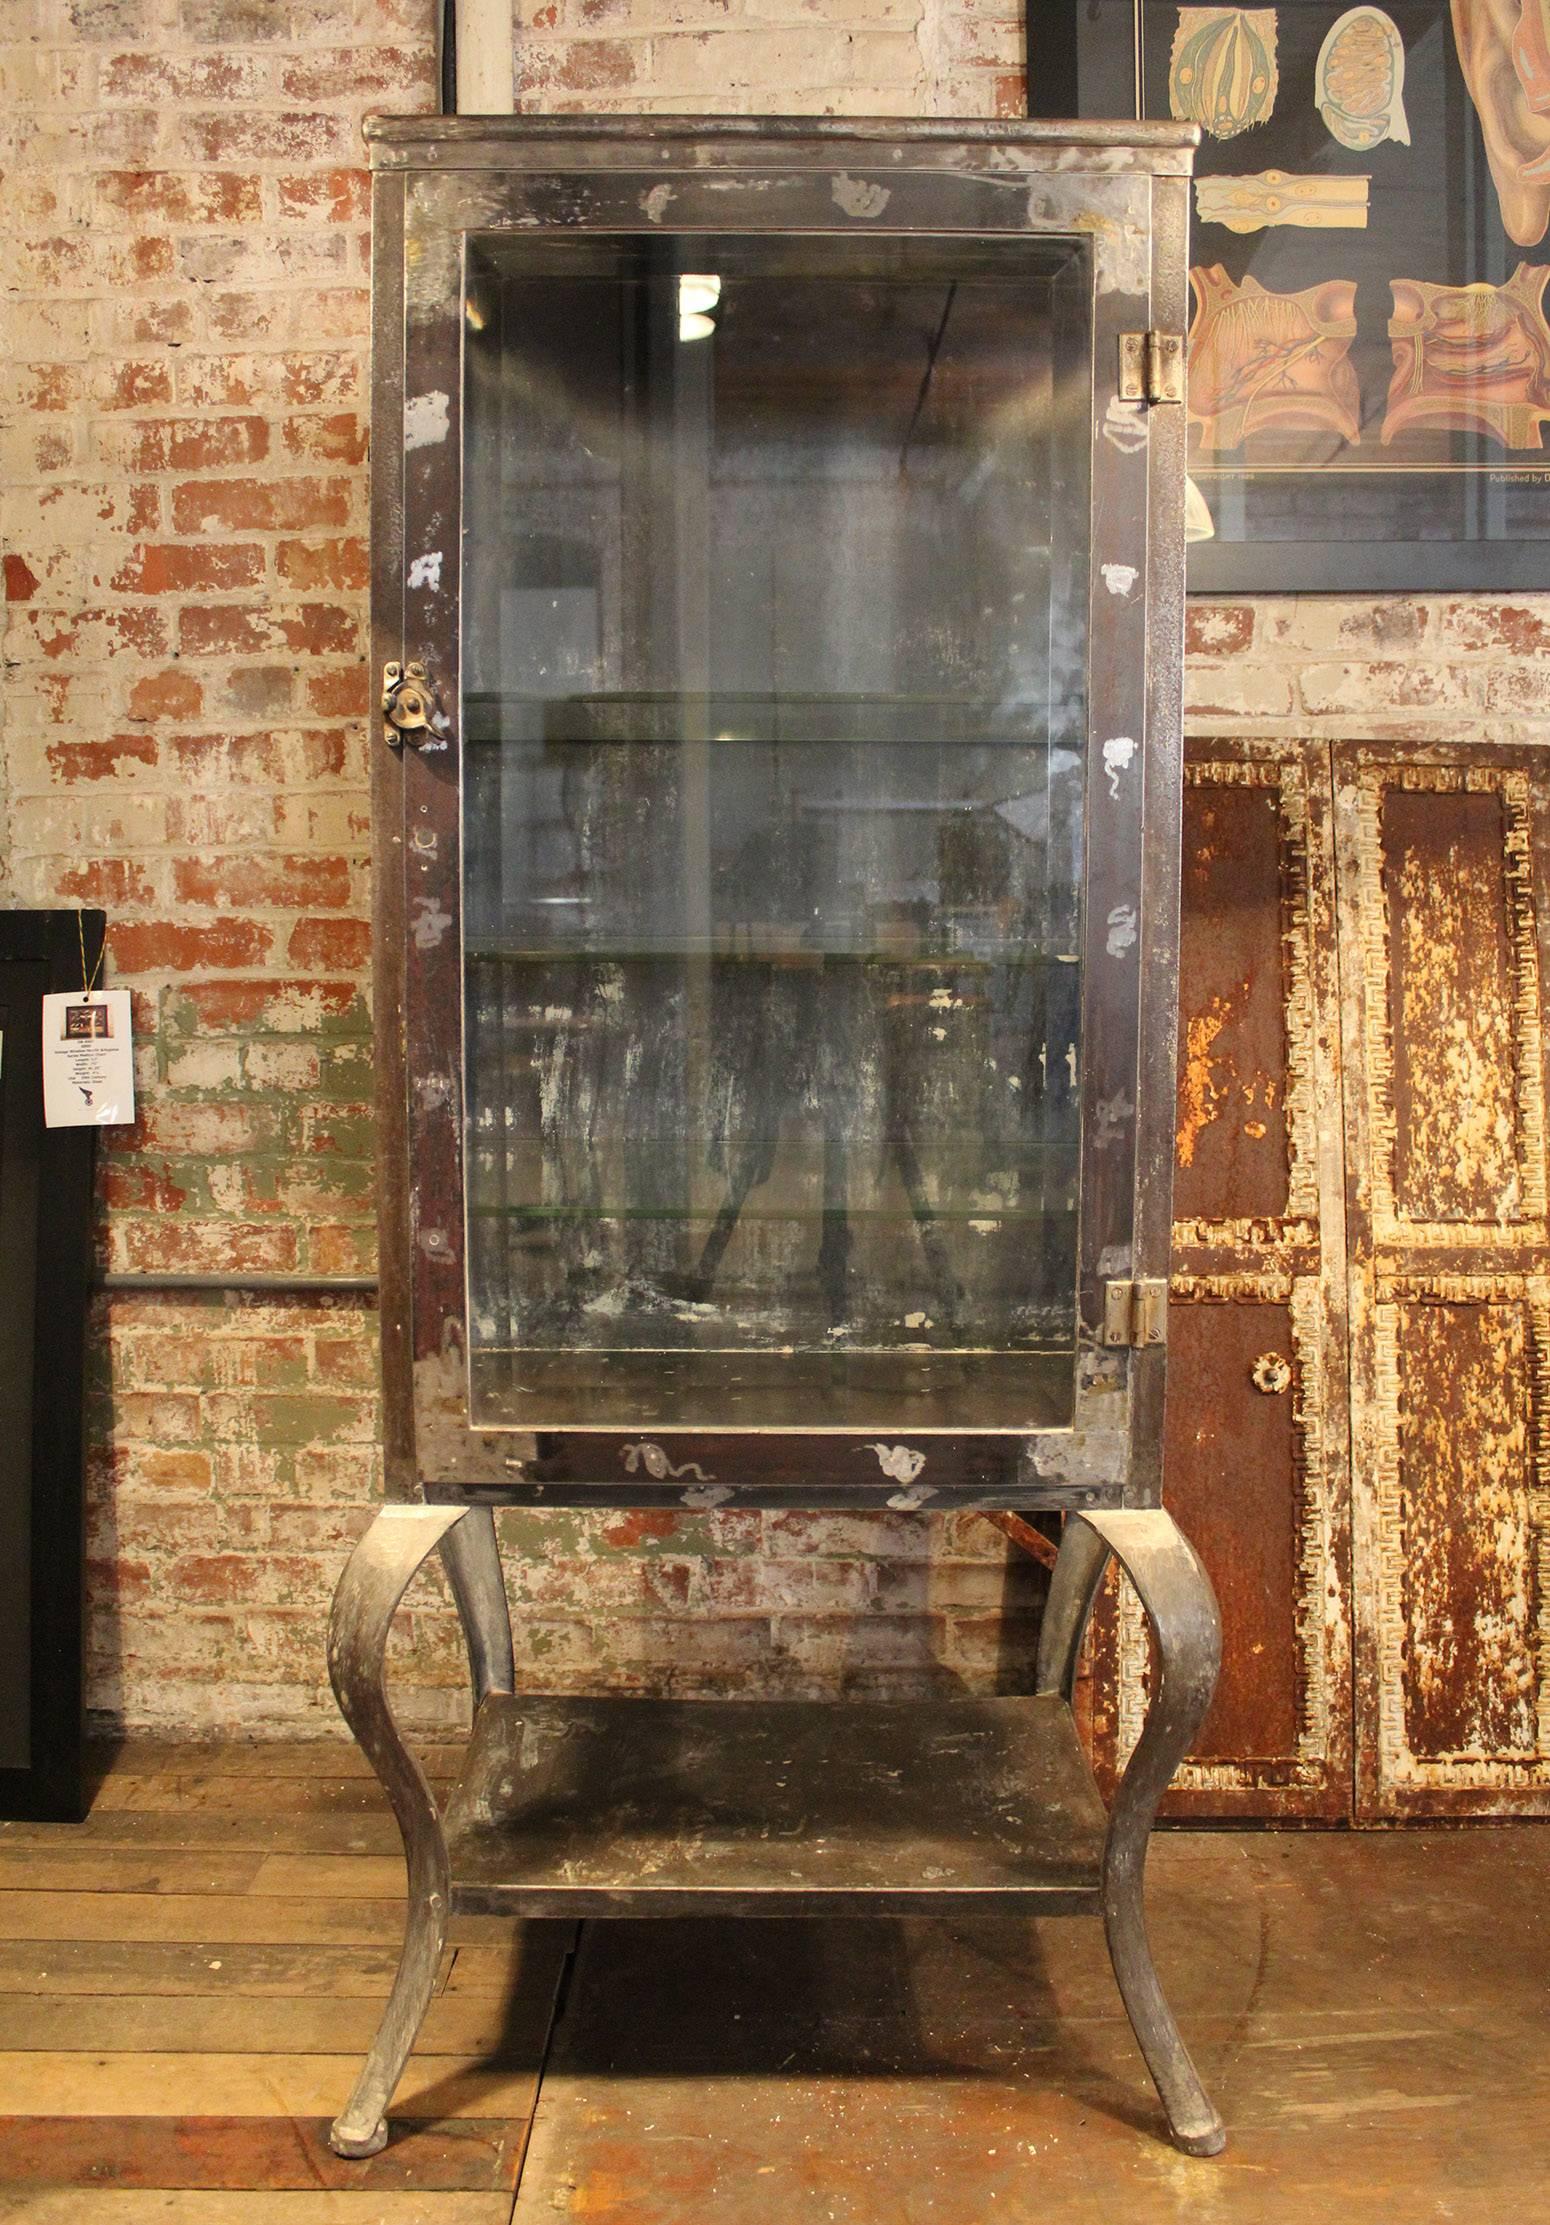 Antique metal and glass doctor's / medical cabinet with cabriole legs and 3 5/16 glass shelves. Vintage steel / glass / cast iron storage cabinet is from the 1920s. All original. In great condition minus a few chips to the glass shelves. Cabinet